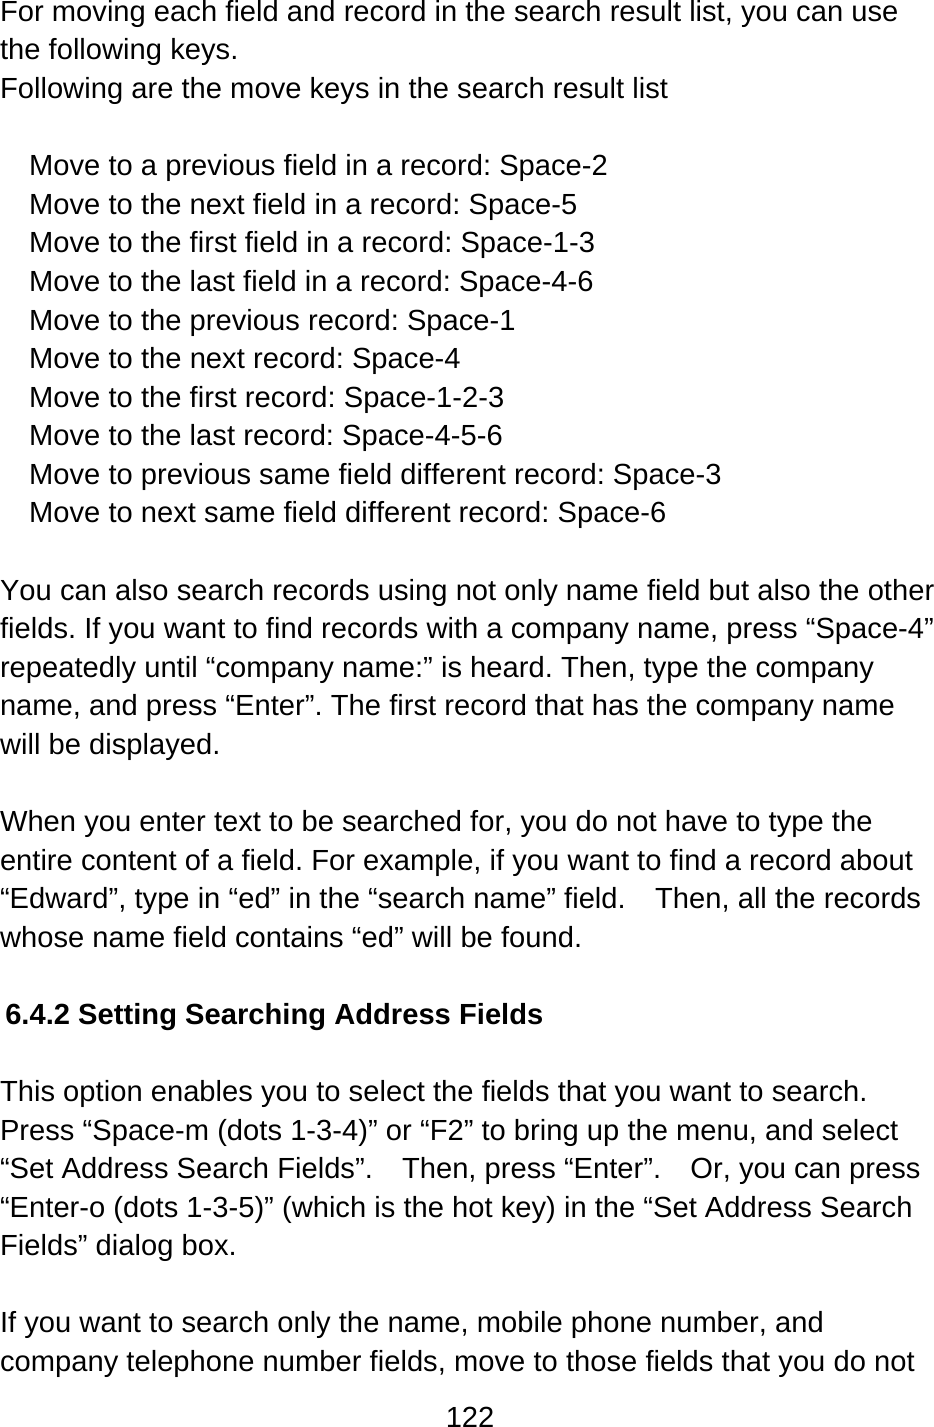 122  For moving each field and record in the search result list, you can use the following keys. Following are the move keys in the search result list  Move to a previous field in a record: Space-2 Move to the next field in a record: Space-5 Move to the first field in a record: Space-1-3 Move to the last field in a record: Space-4-6 Move to the previous record: Space-1 Move to the next record: Space-4 Move to the first record: Space-1-2-3 Move to the last record: Space-4-5-6 Move to previous same field different record: Space-3 Move to next same field different record: Space-6  You can also search records using not only name field but also the other fields. If you want to find records with a company name, press “Space-4” repeatedly until “company name:” is heard. Then, type the company name, and press “Enter”. The first record that has the company name will be displayed.  When you enter text to be searched for, you do not have to type the entire content of a field. For example, if you want to find a record about “Edward”, type in “ed” in the “search name” field.    Then, all the records whose name field contains “ed” will be found.  6.4.2 Setting Searching Address Fields  This option enables you to select the fields that you want to search.   Press “Space-m (dots 1-3-4)” or “F2” to bring up the menu, and select “Set Address Search Fields”.    Then, press “Enter”.    Or, you can press “Enter-o (dots 1-3-5)” (which is the hot key) in the “Set Address Search Fields” dialog box.  If you want to search only the name, mobile phone number, and company telephone number fields, move to those fields that you do not 